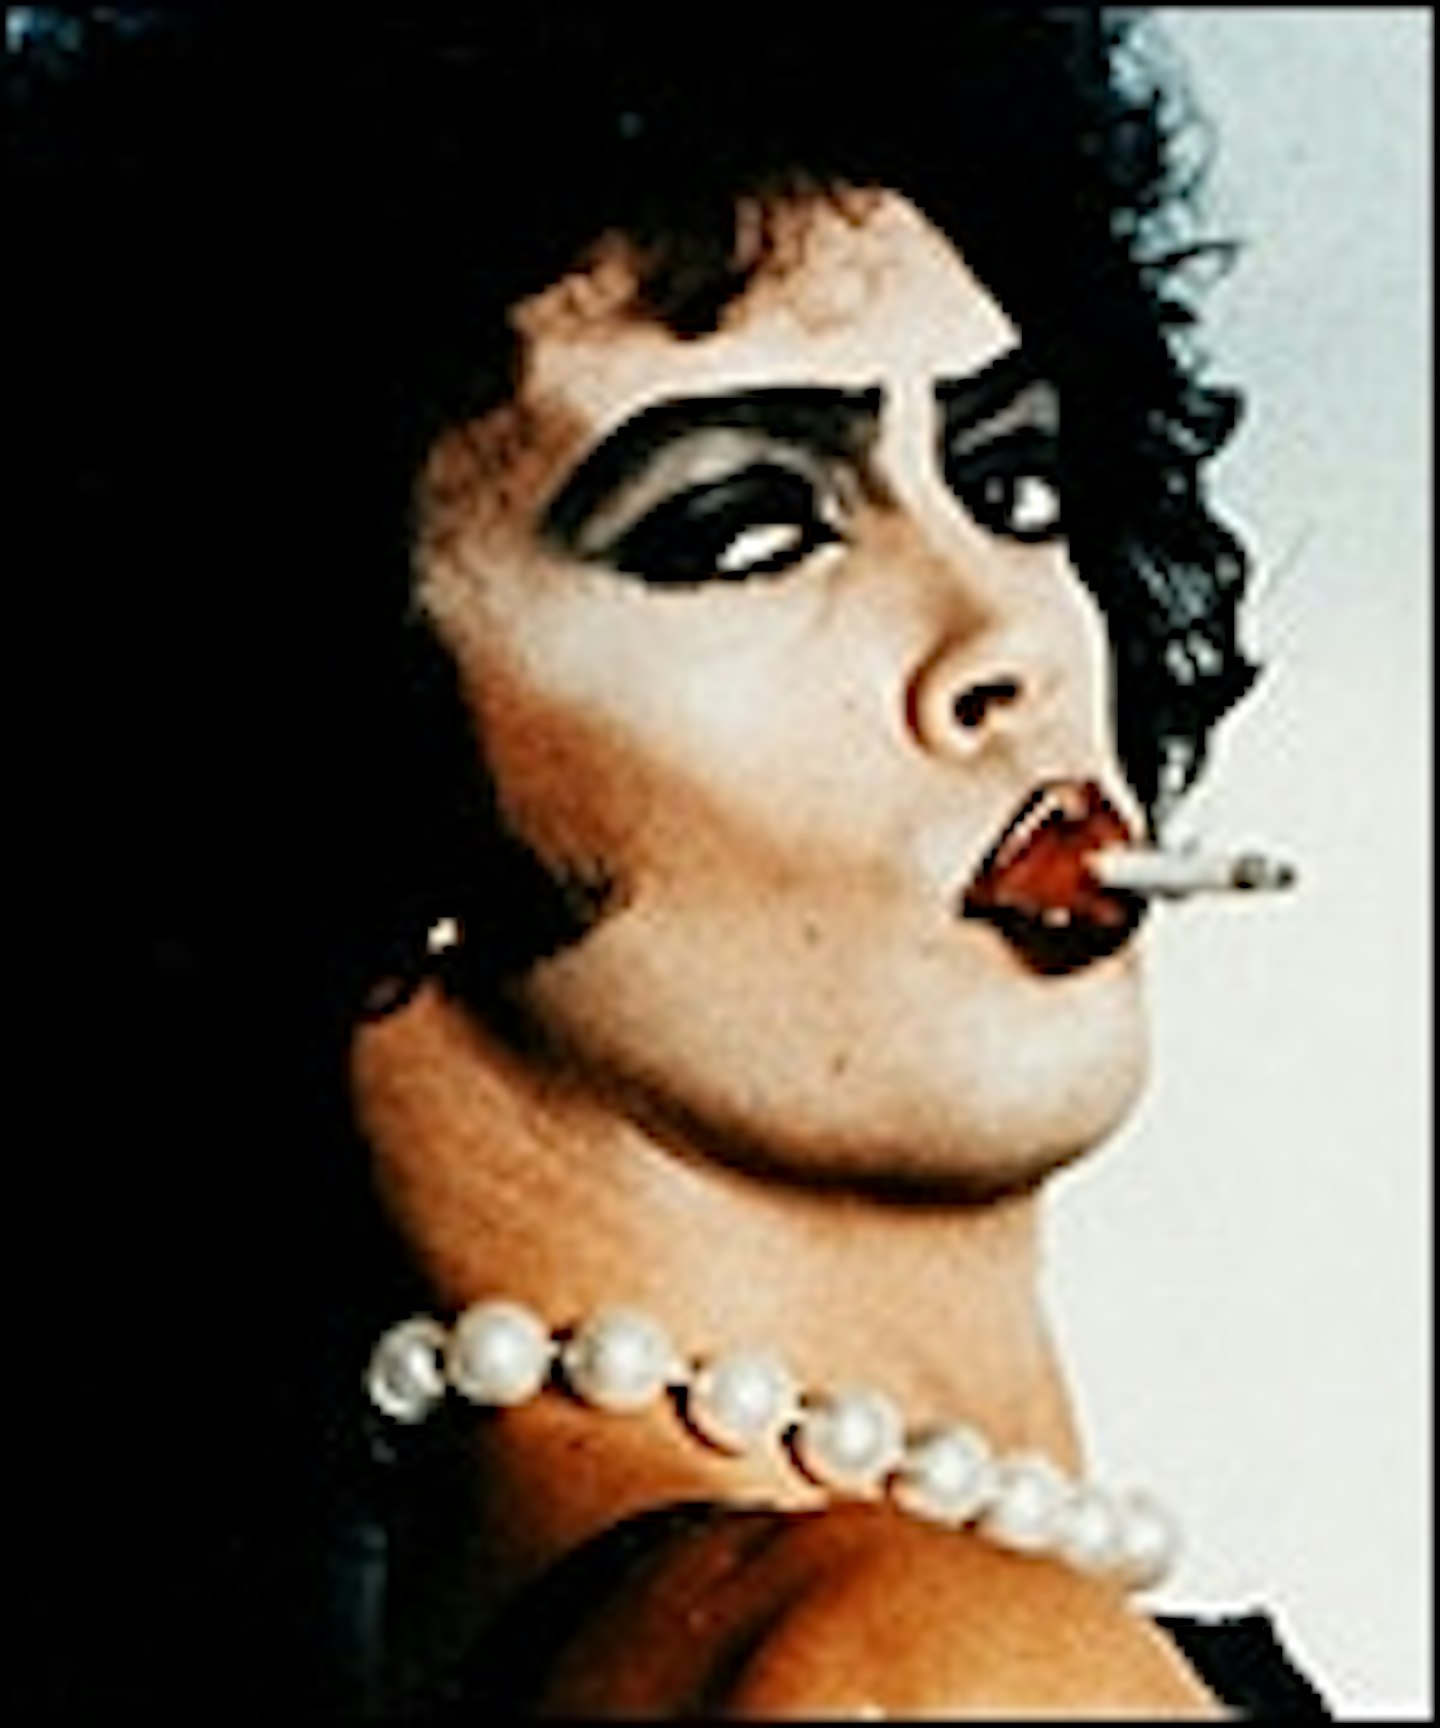 Ready For A New Rocky Horror?